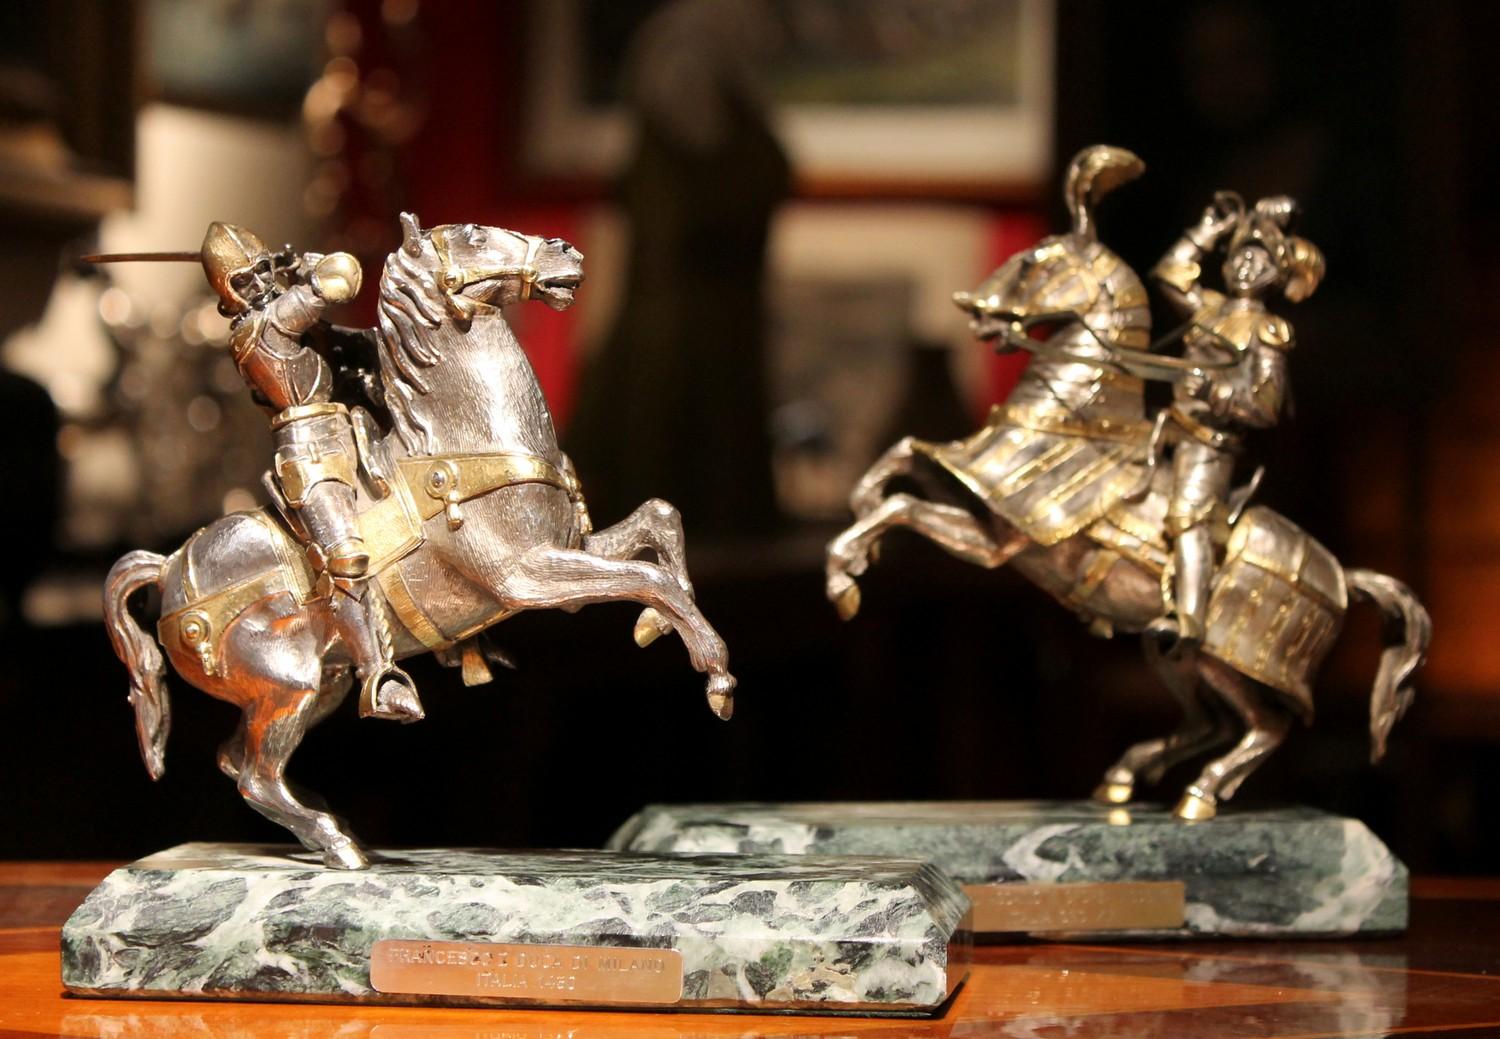 Medieval Antique Italian Sterling Silver Equestrian Knights Statues Figures on Horseback